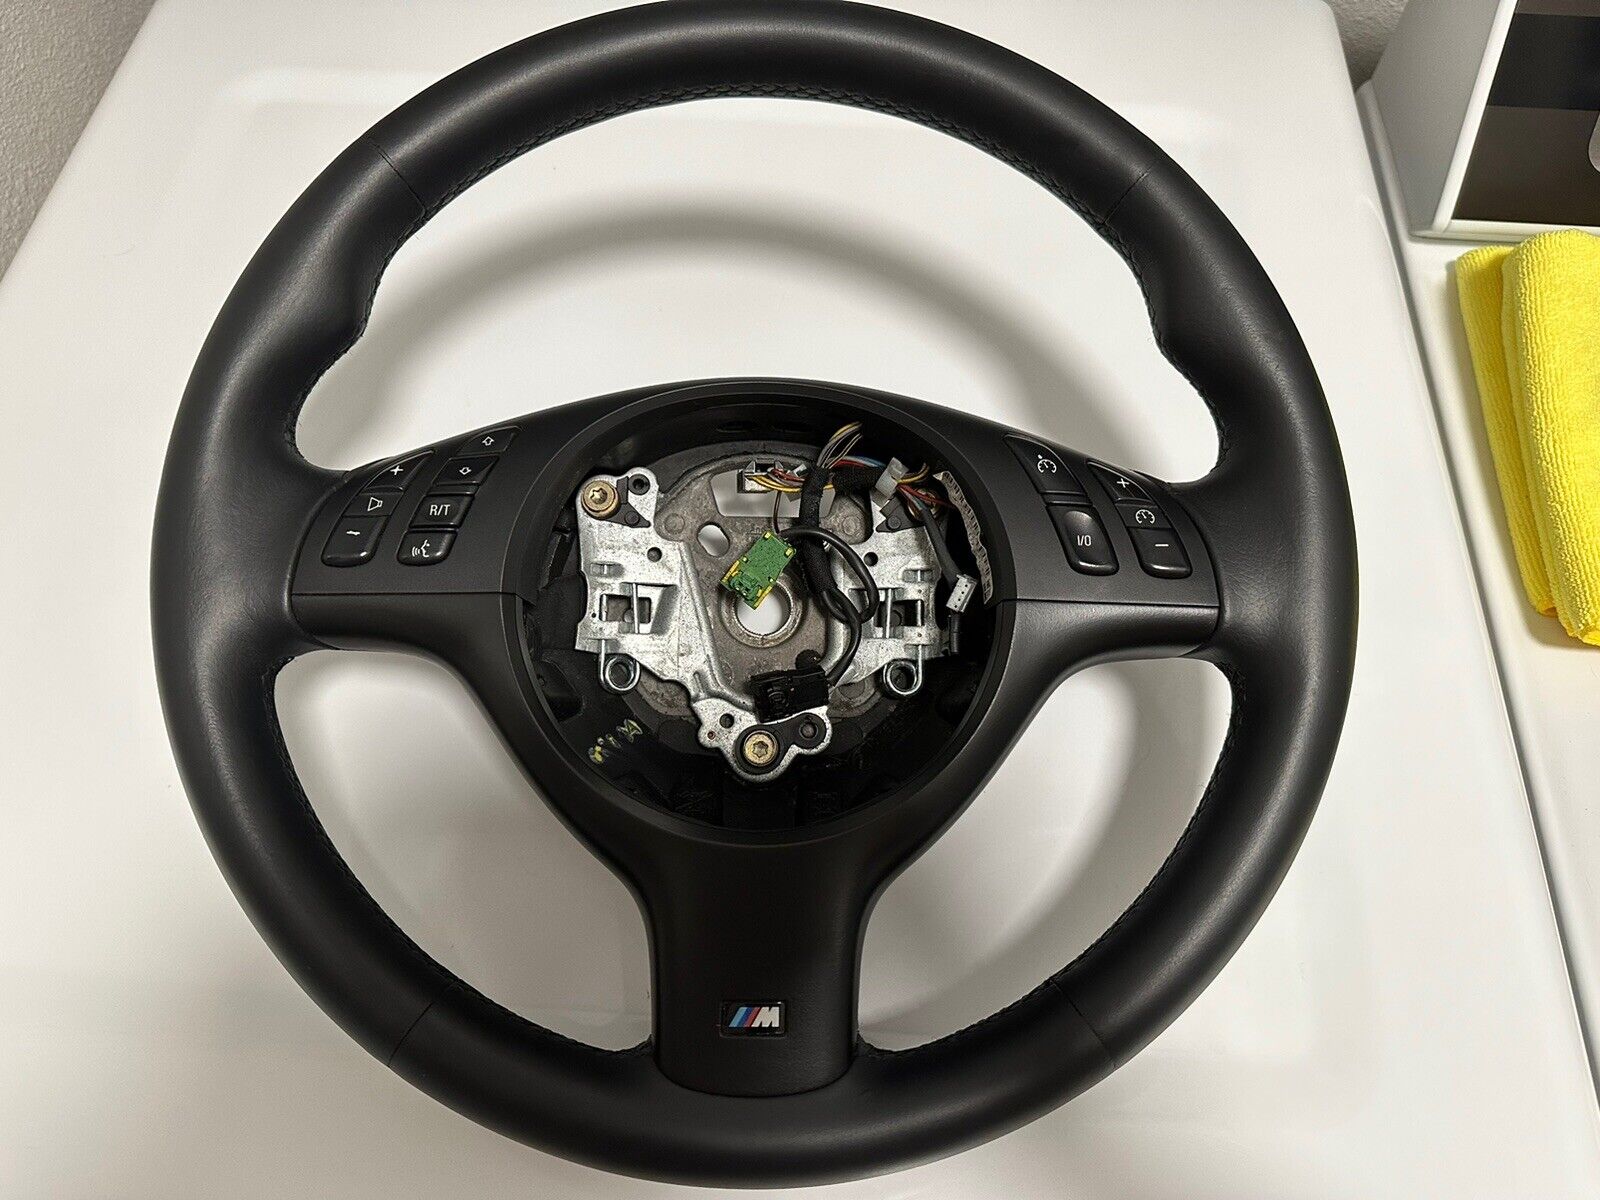 OEM Refinished E39 M5/E46 M3 Steering Wheel With All Accessories/Turn Signals